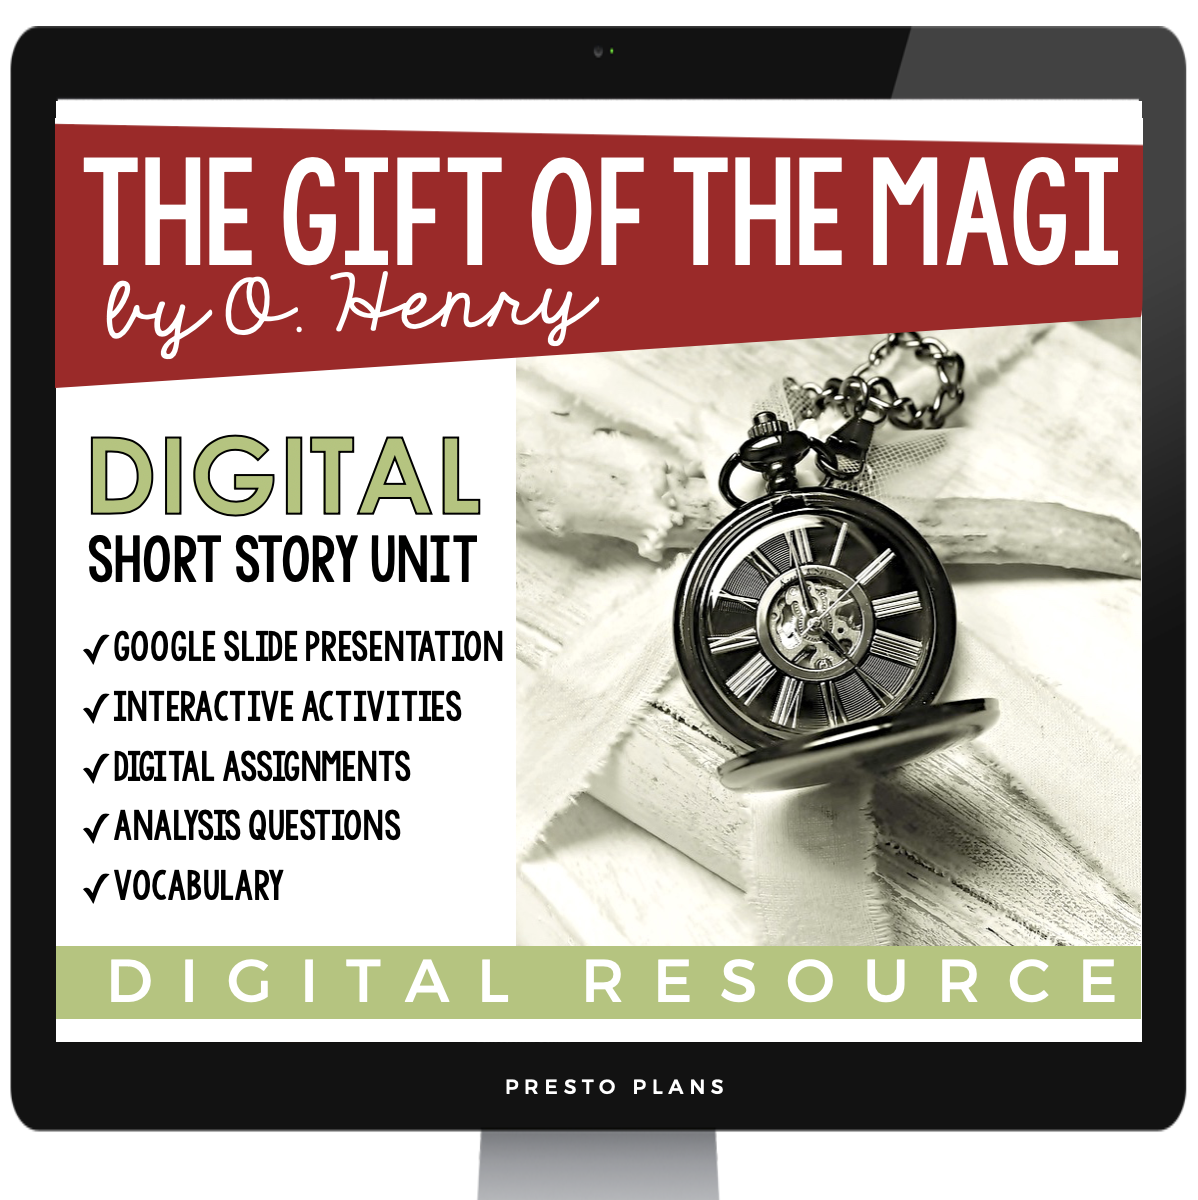 THE GIFT OF THE MAGI BY O HENRY SHORT STORY DIGITAL RESOURCES Prestoplanners